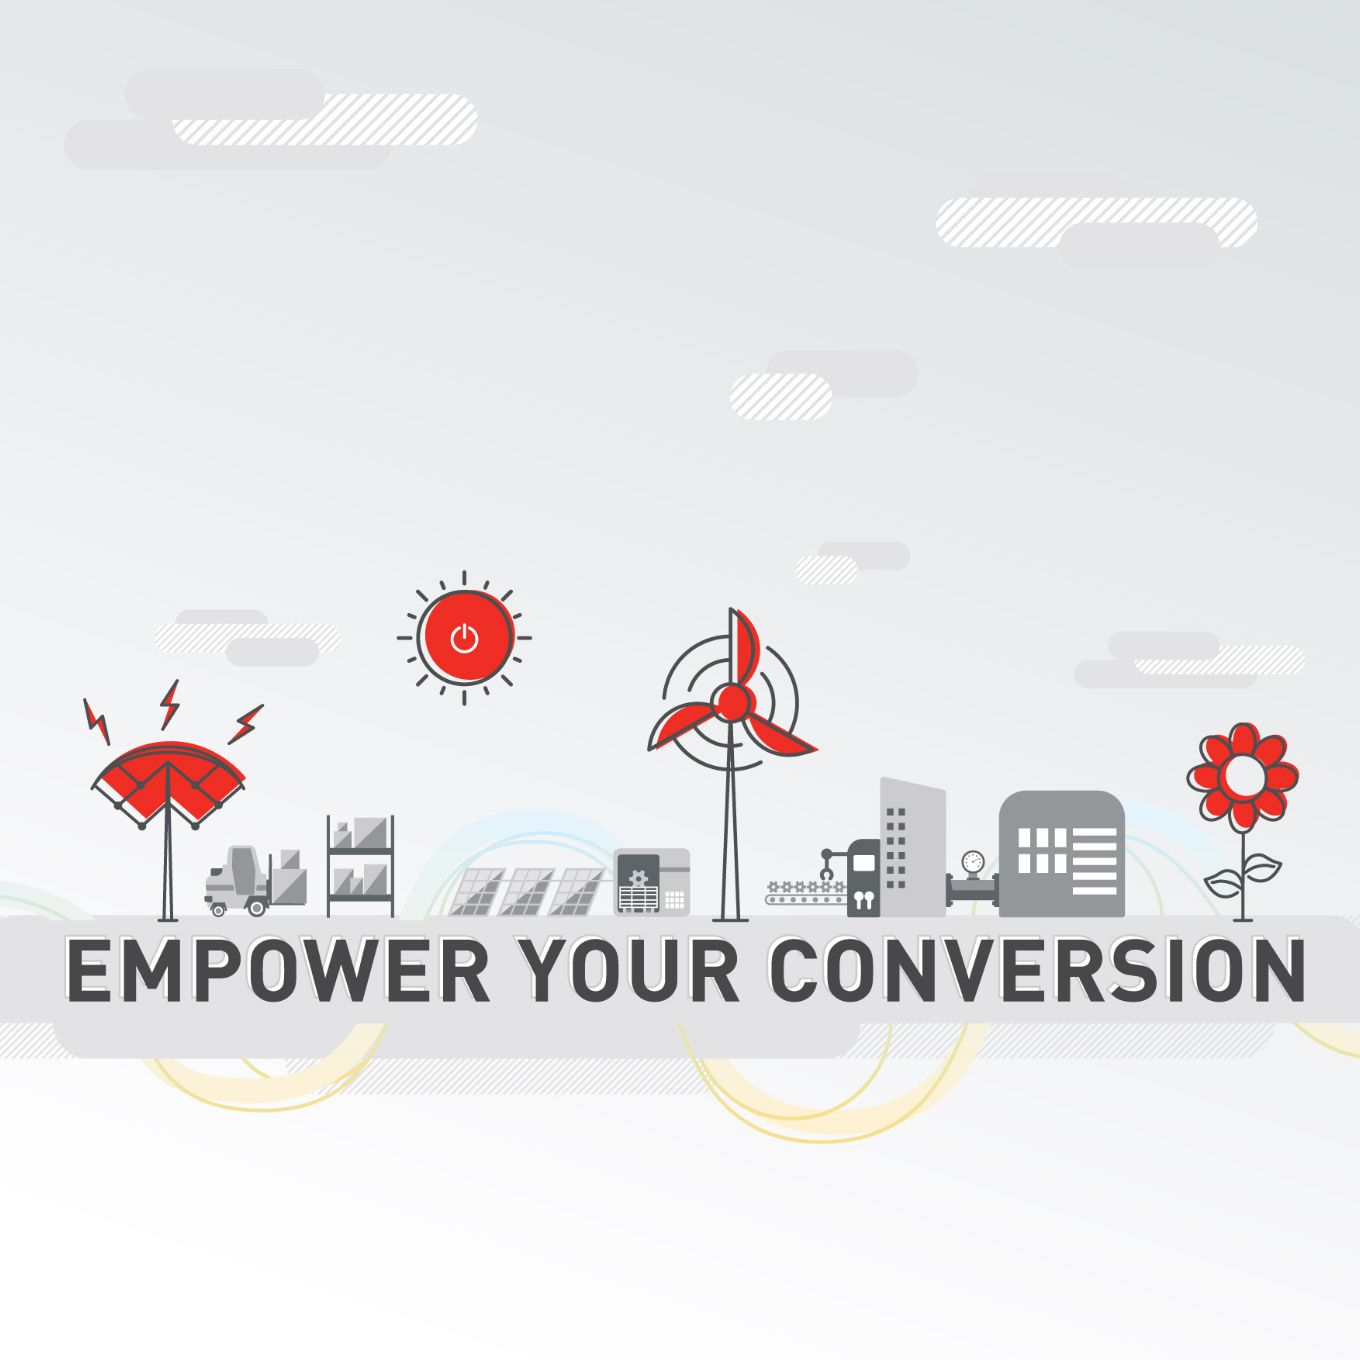 AEP empower your conversion